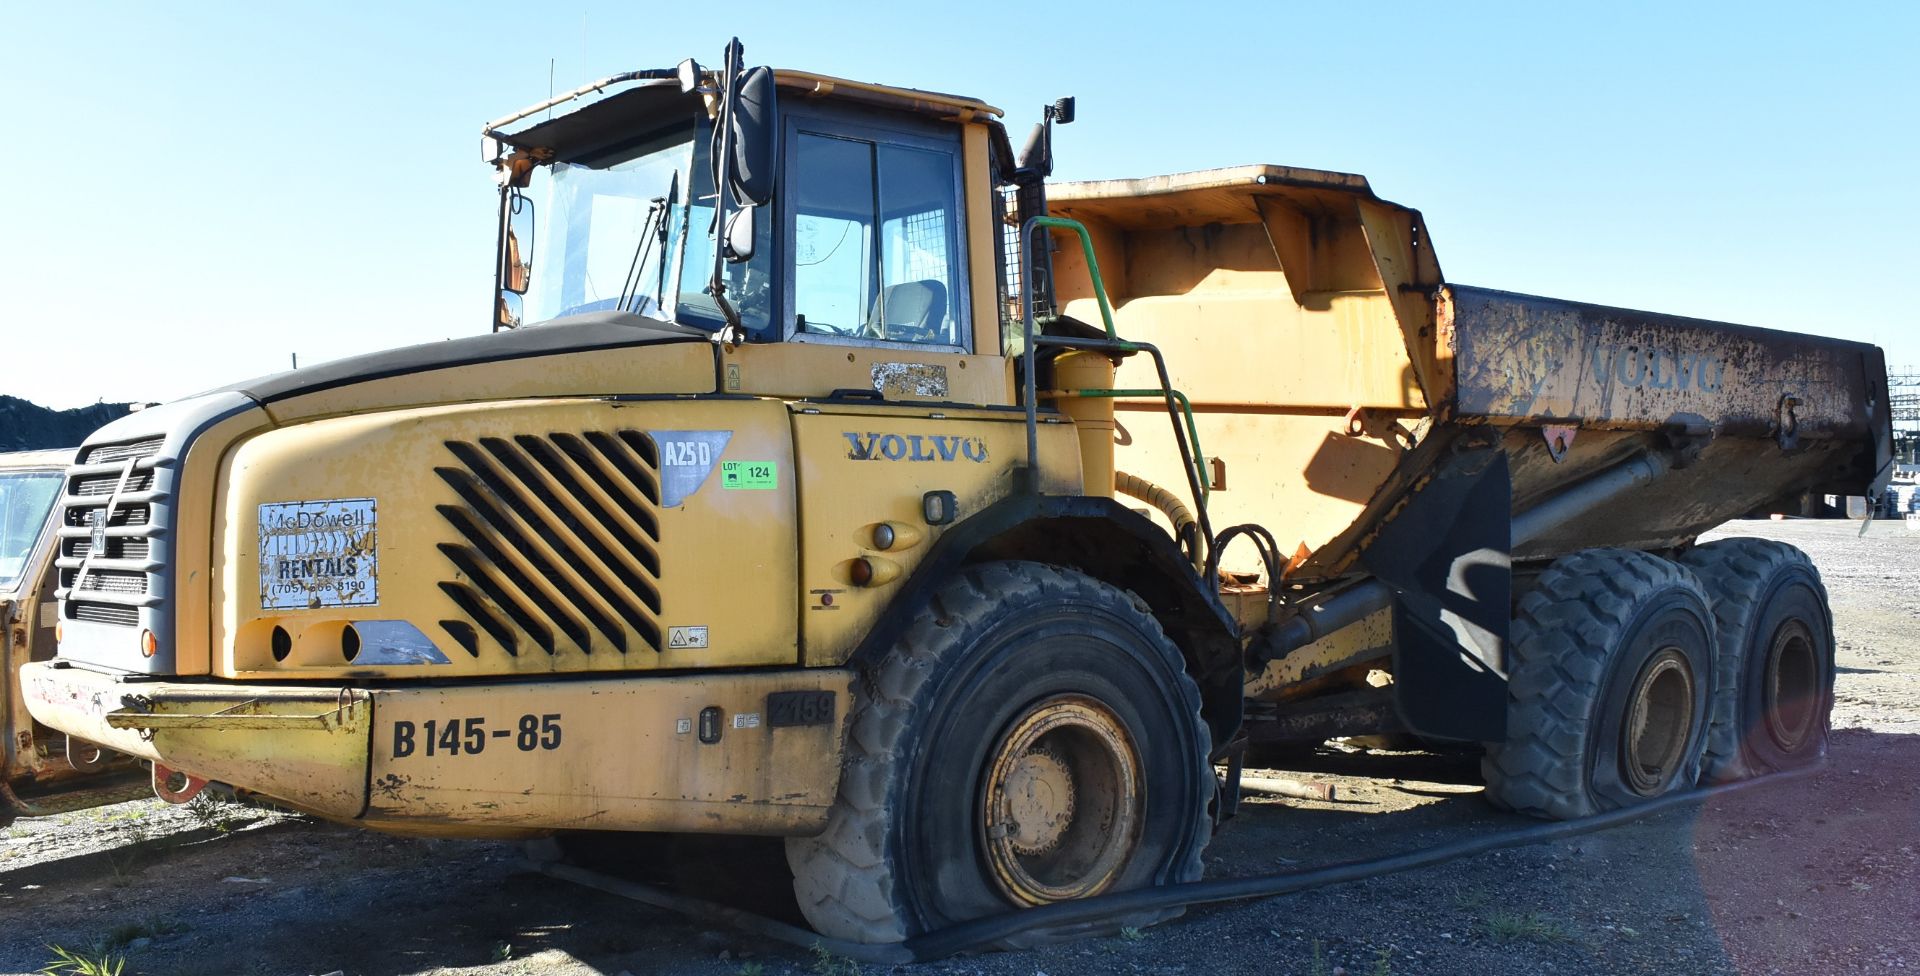 VOLVO A25D ARTICULATED DUMP TRUCK WITH D9BAAE3 9.4L DIESEL ENGINE, 17.01 YRD/3 MAX. CAPACITY (